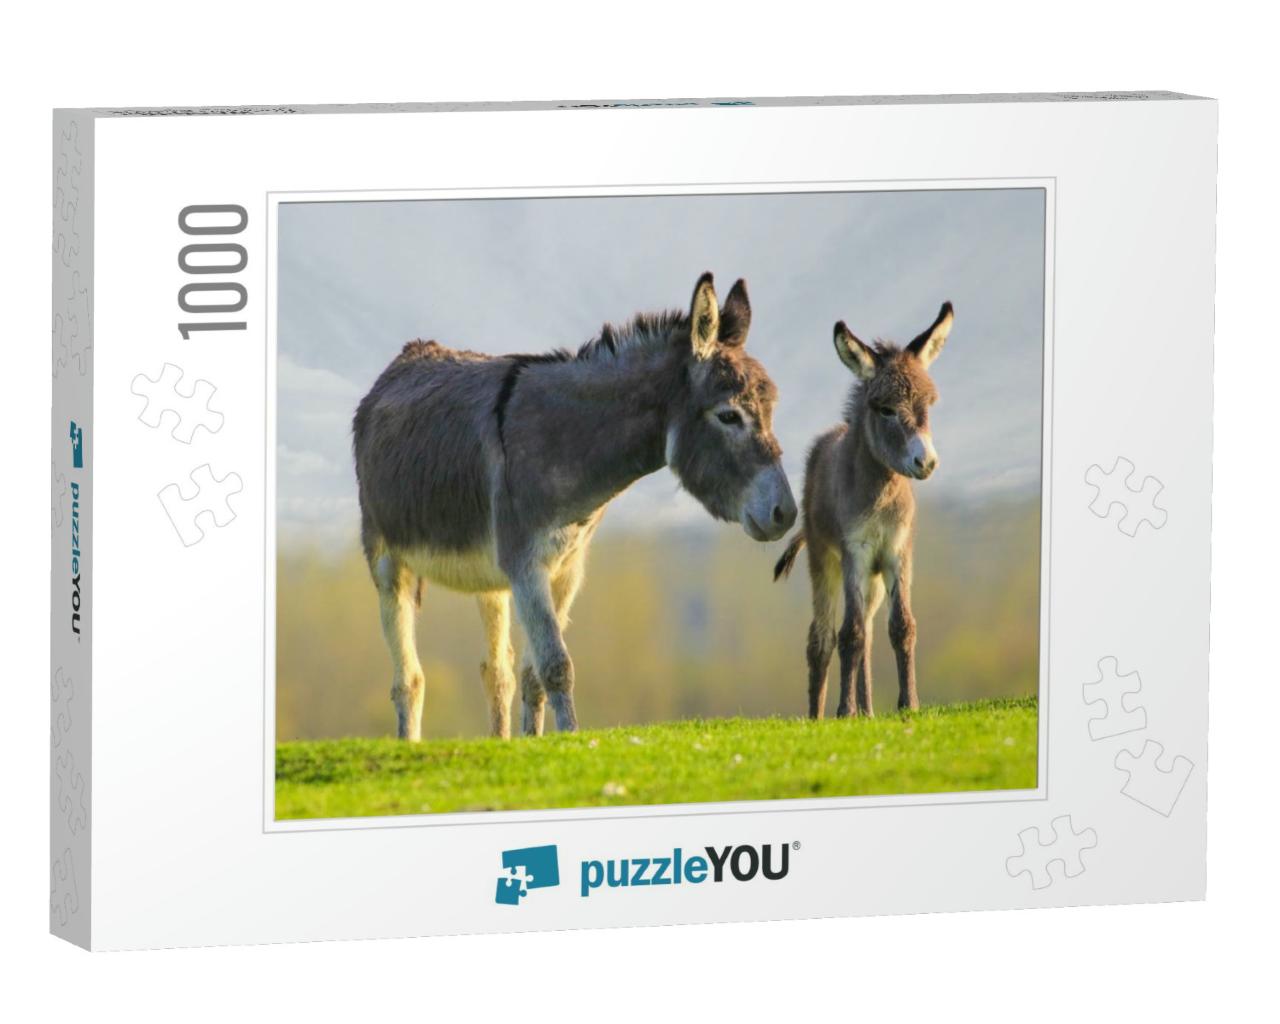 Grey Cute Baby Donkey & Mother on Floral Meadow... Jigsaw Puzzle with 1000 pieces